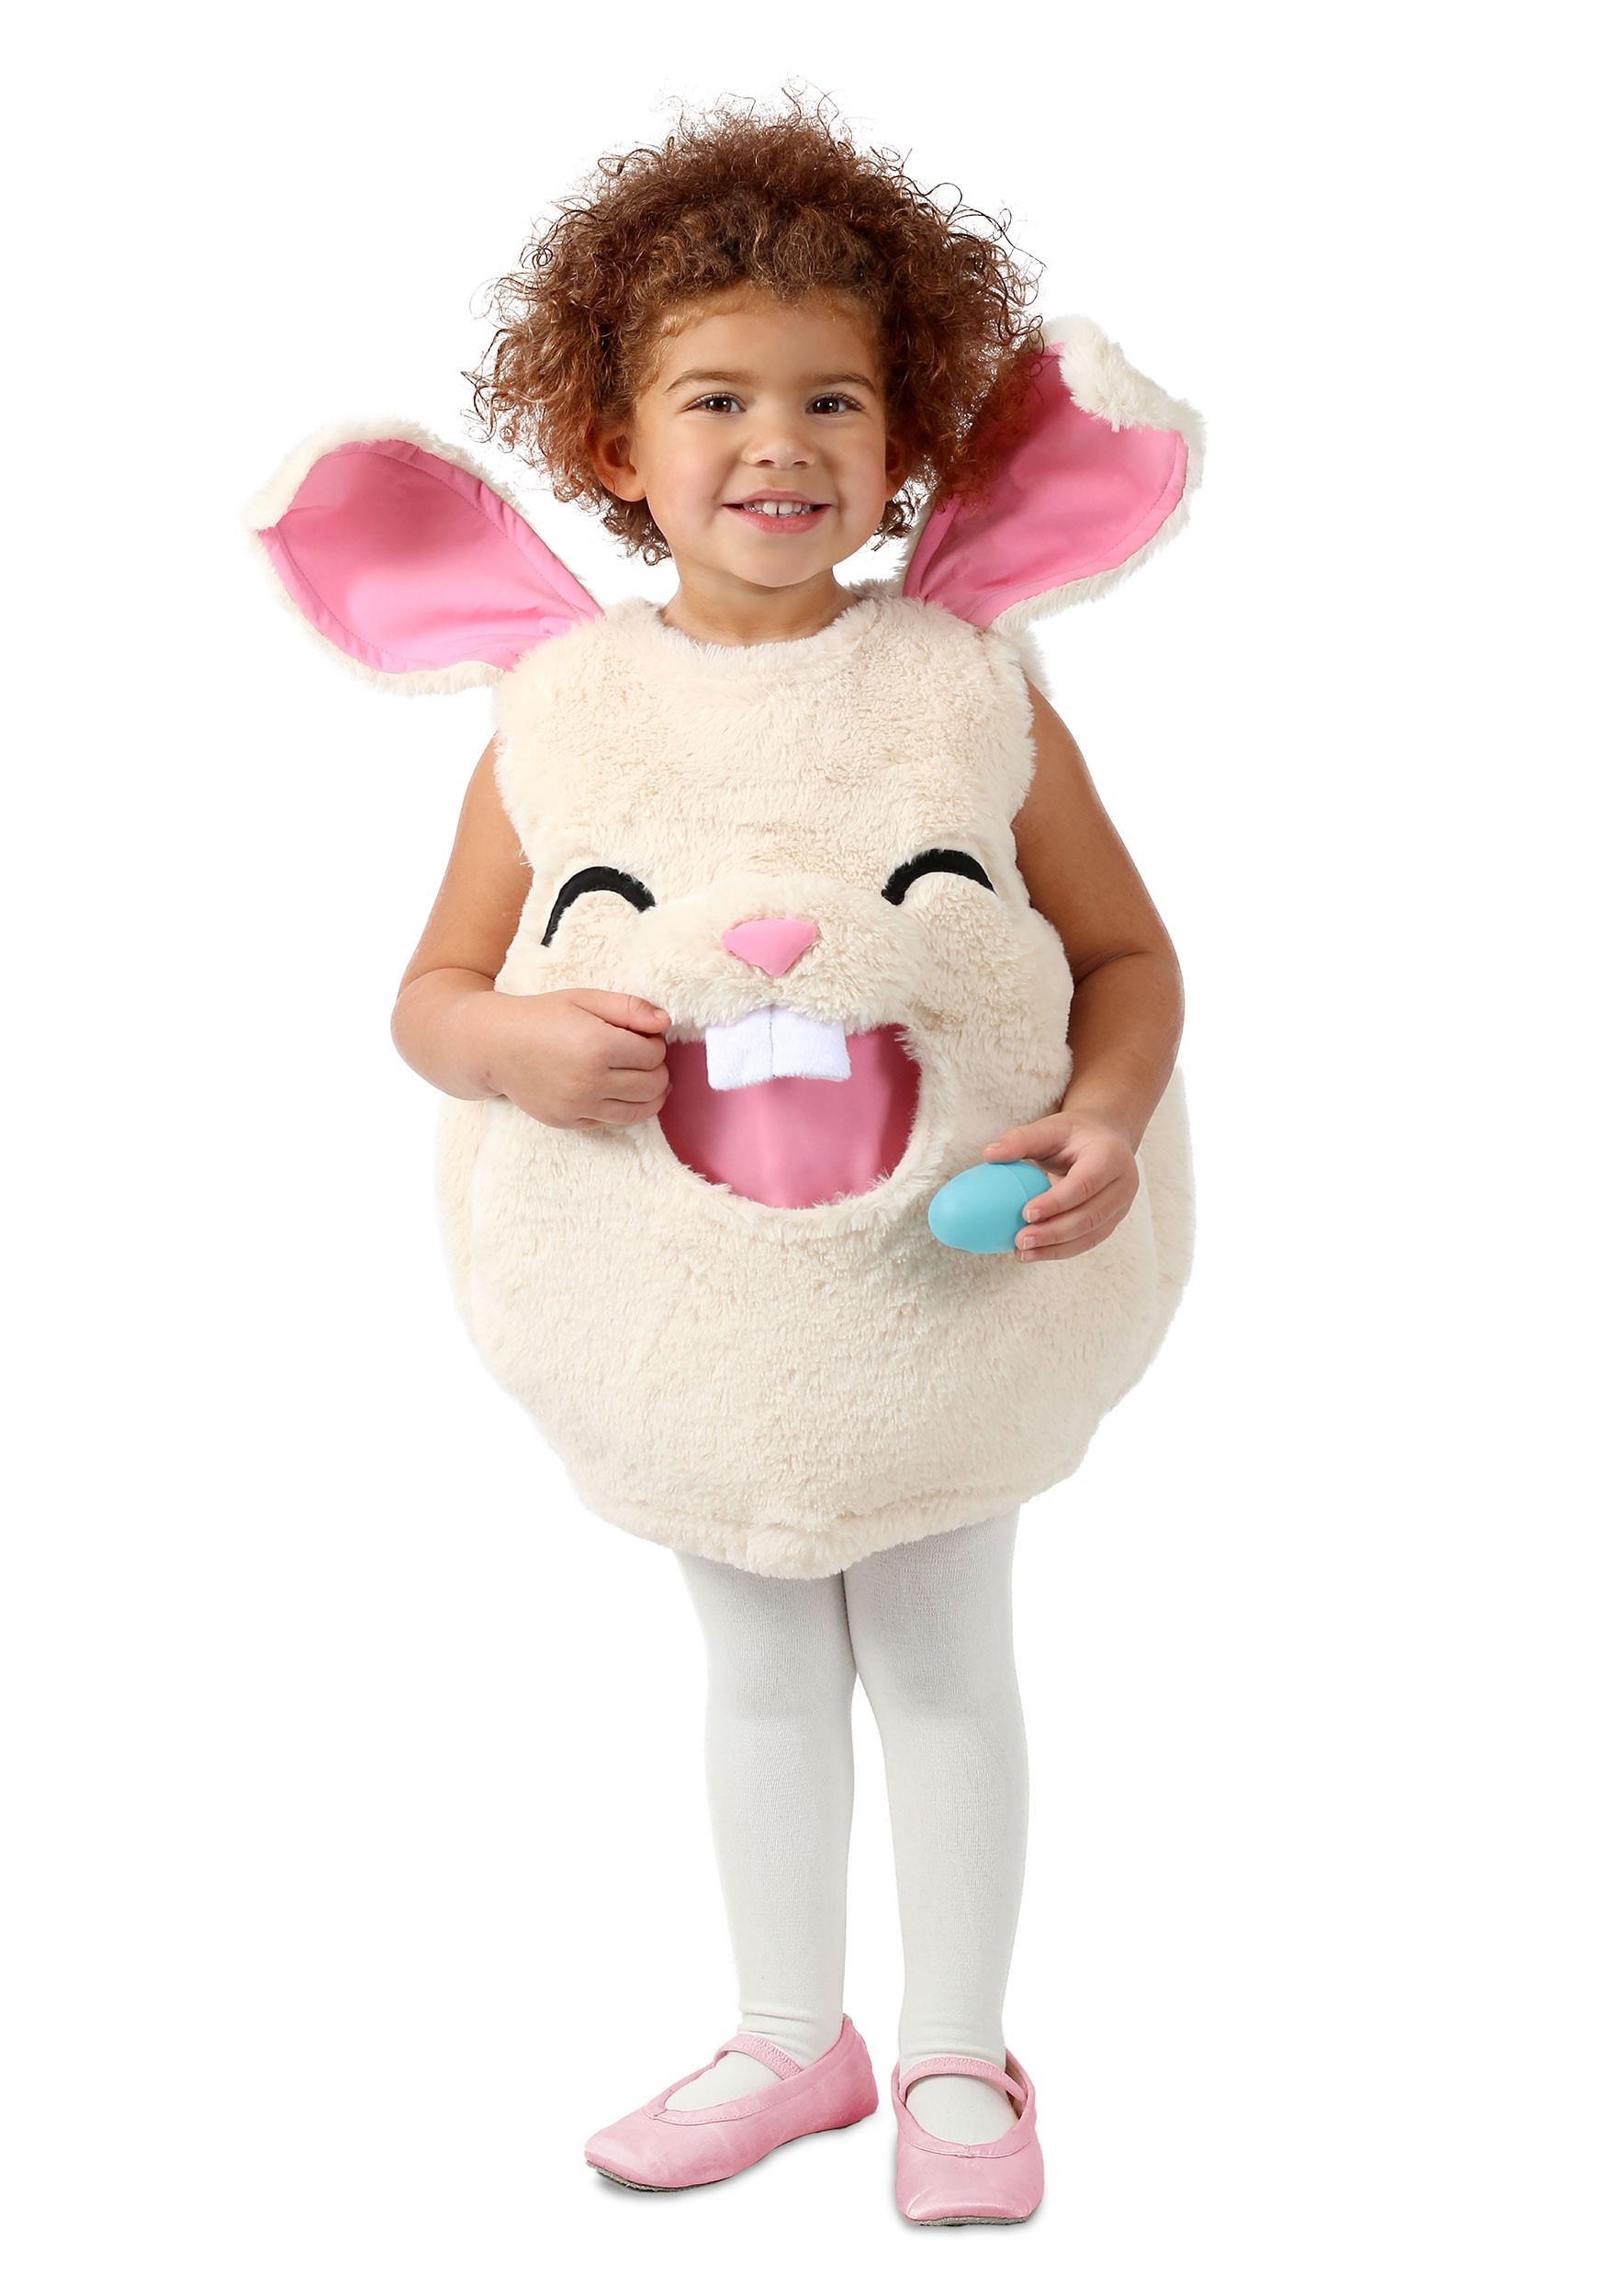 Photos - Fancy Dress Princess Paradise Feed Me Bunny Costume for Kids Brown/Pink PRPP14992 